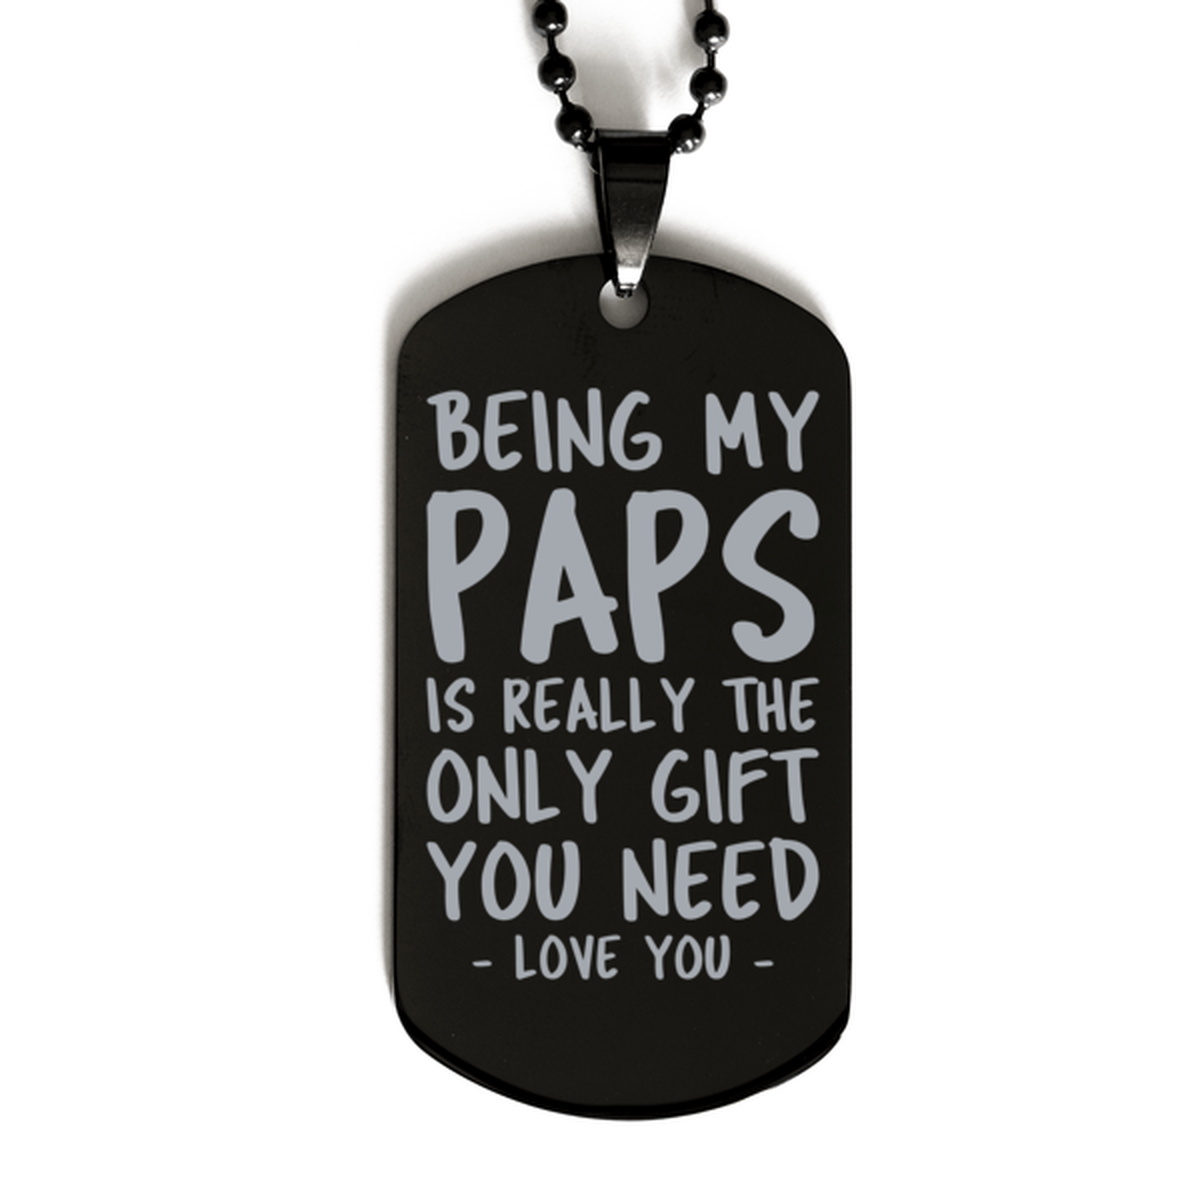 Funny Paps Black Dog Tag Necklace, Being My Paps Is Really the Only Gift You Need, Best Birthday Gifts for Paps